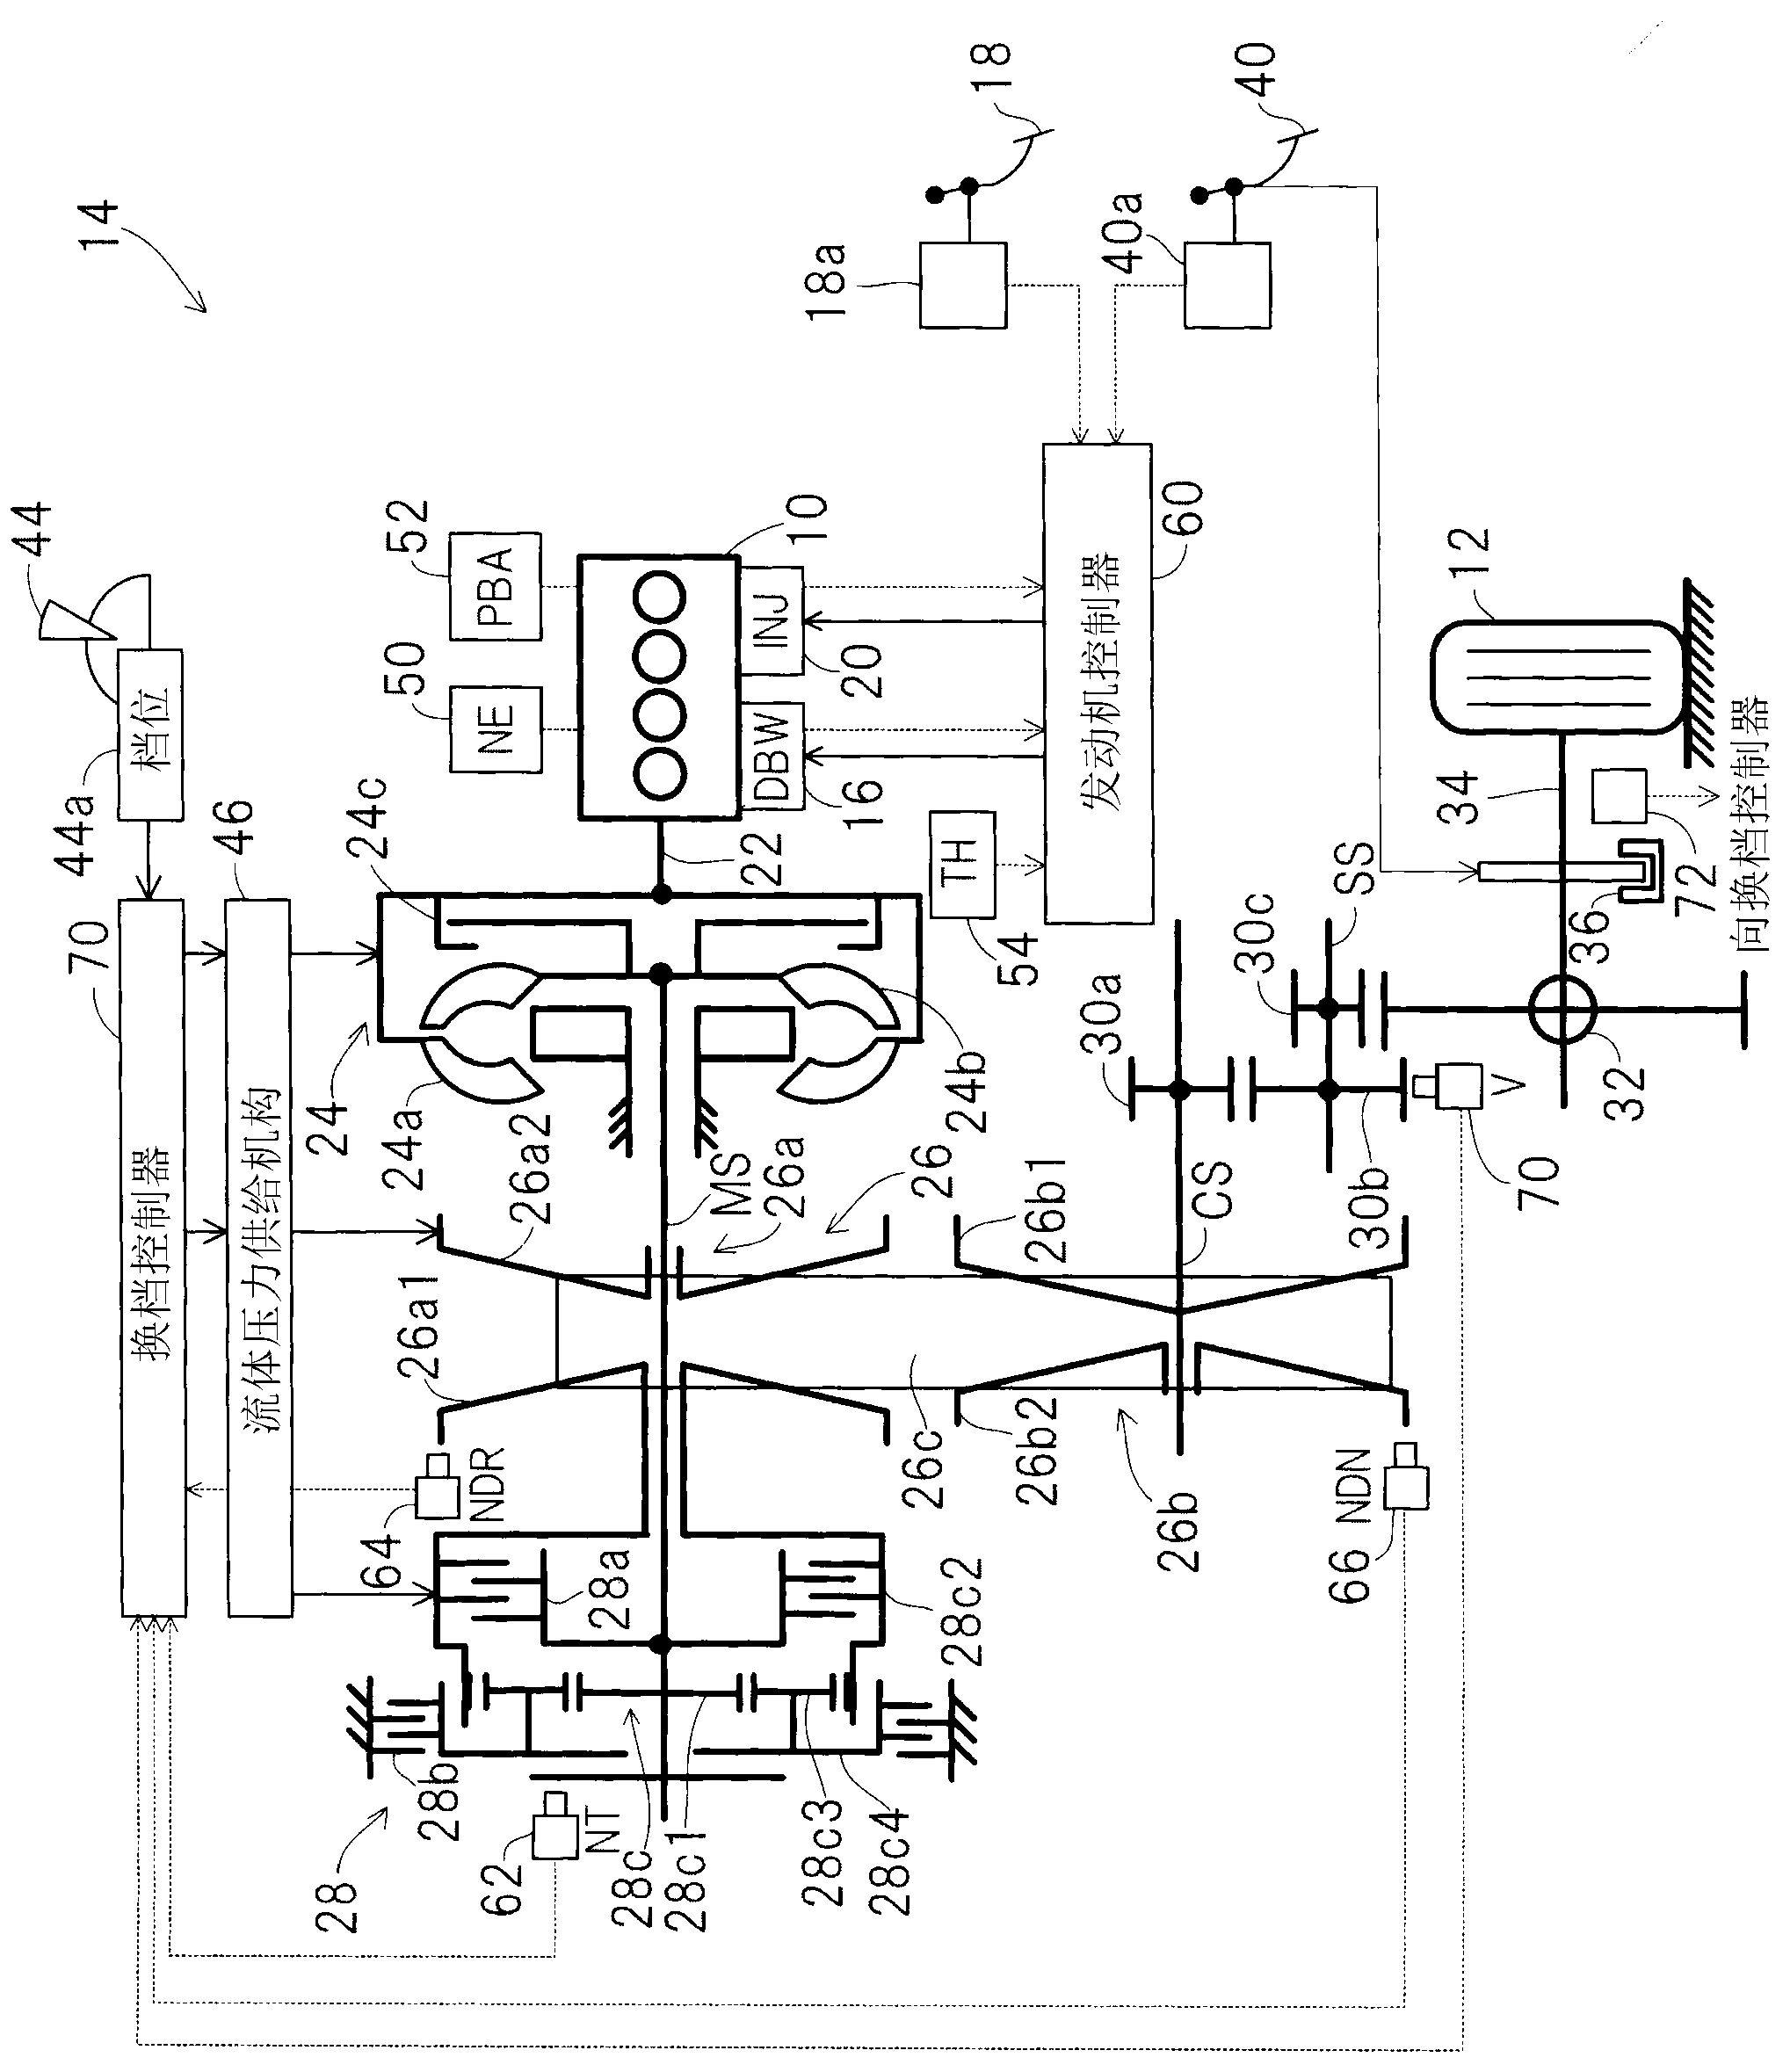 Fluid pressure supply device of transmission